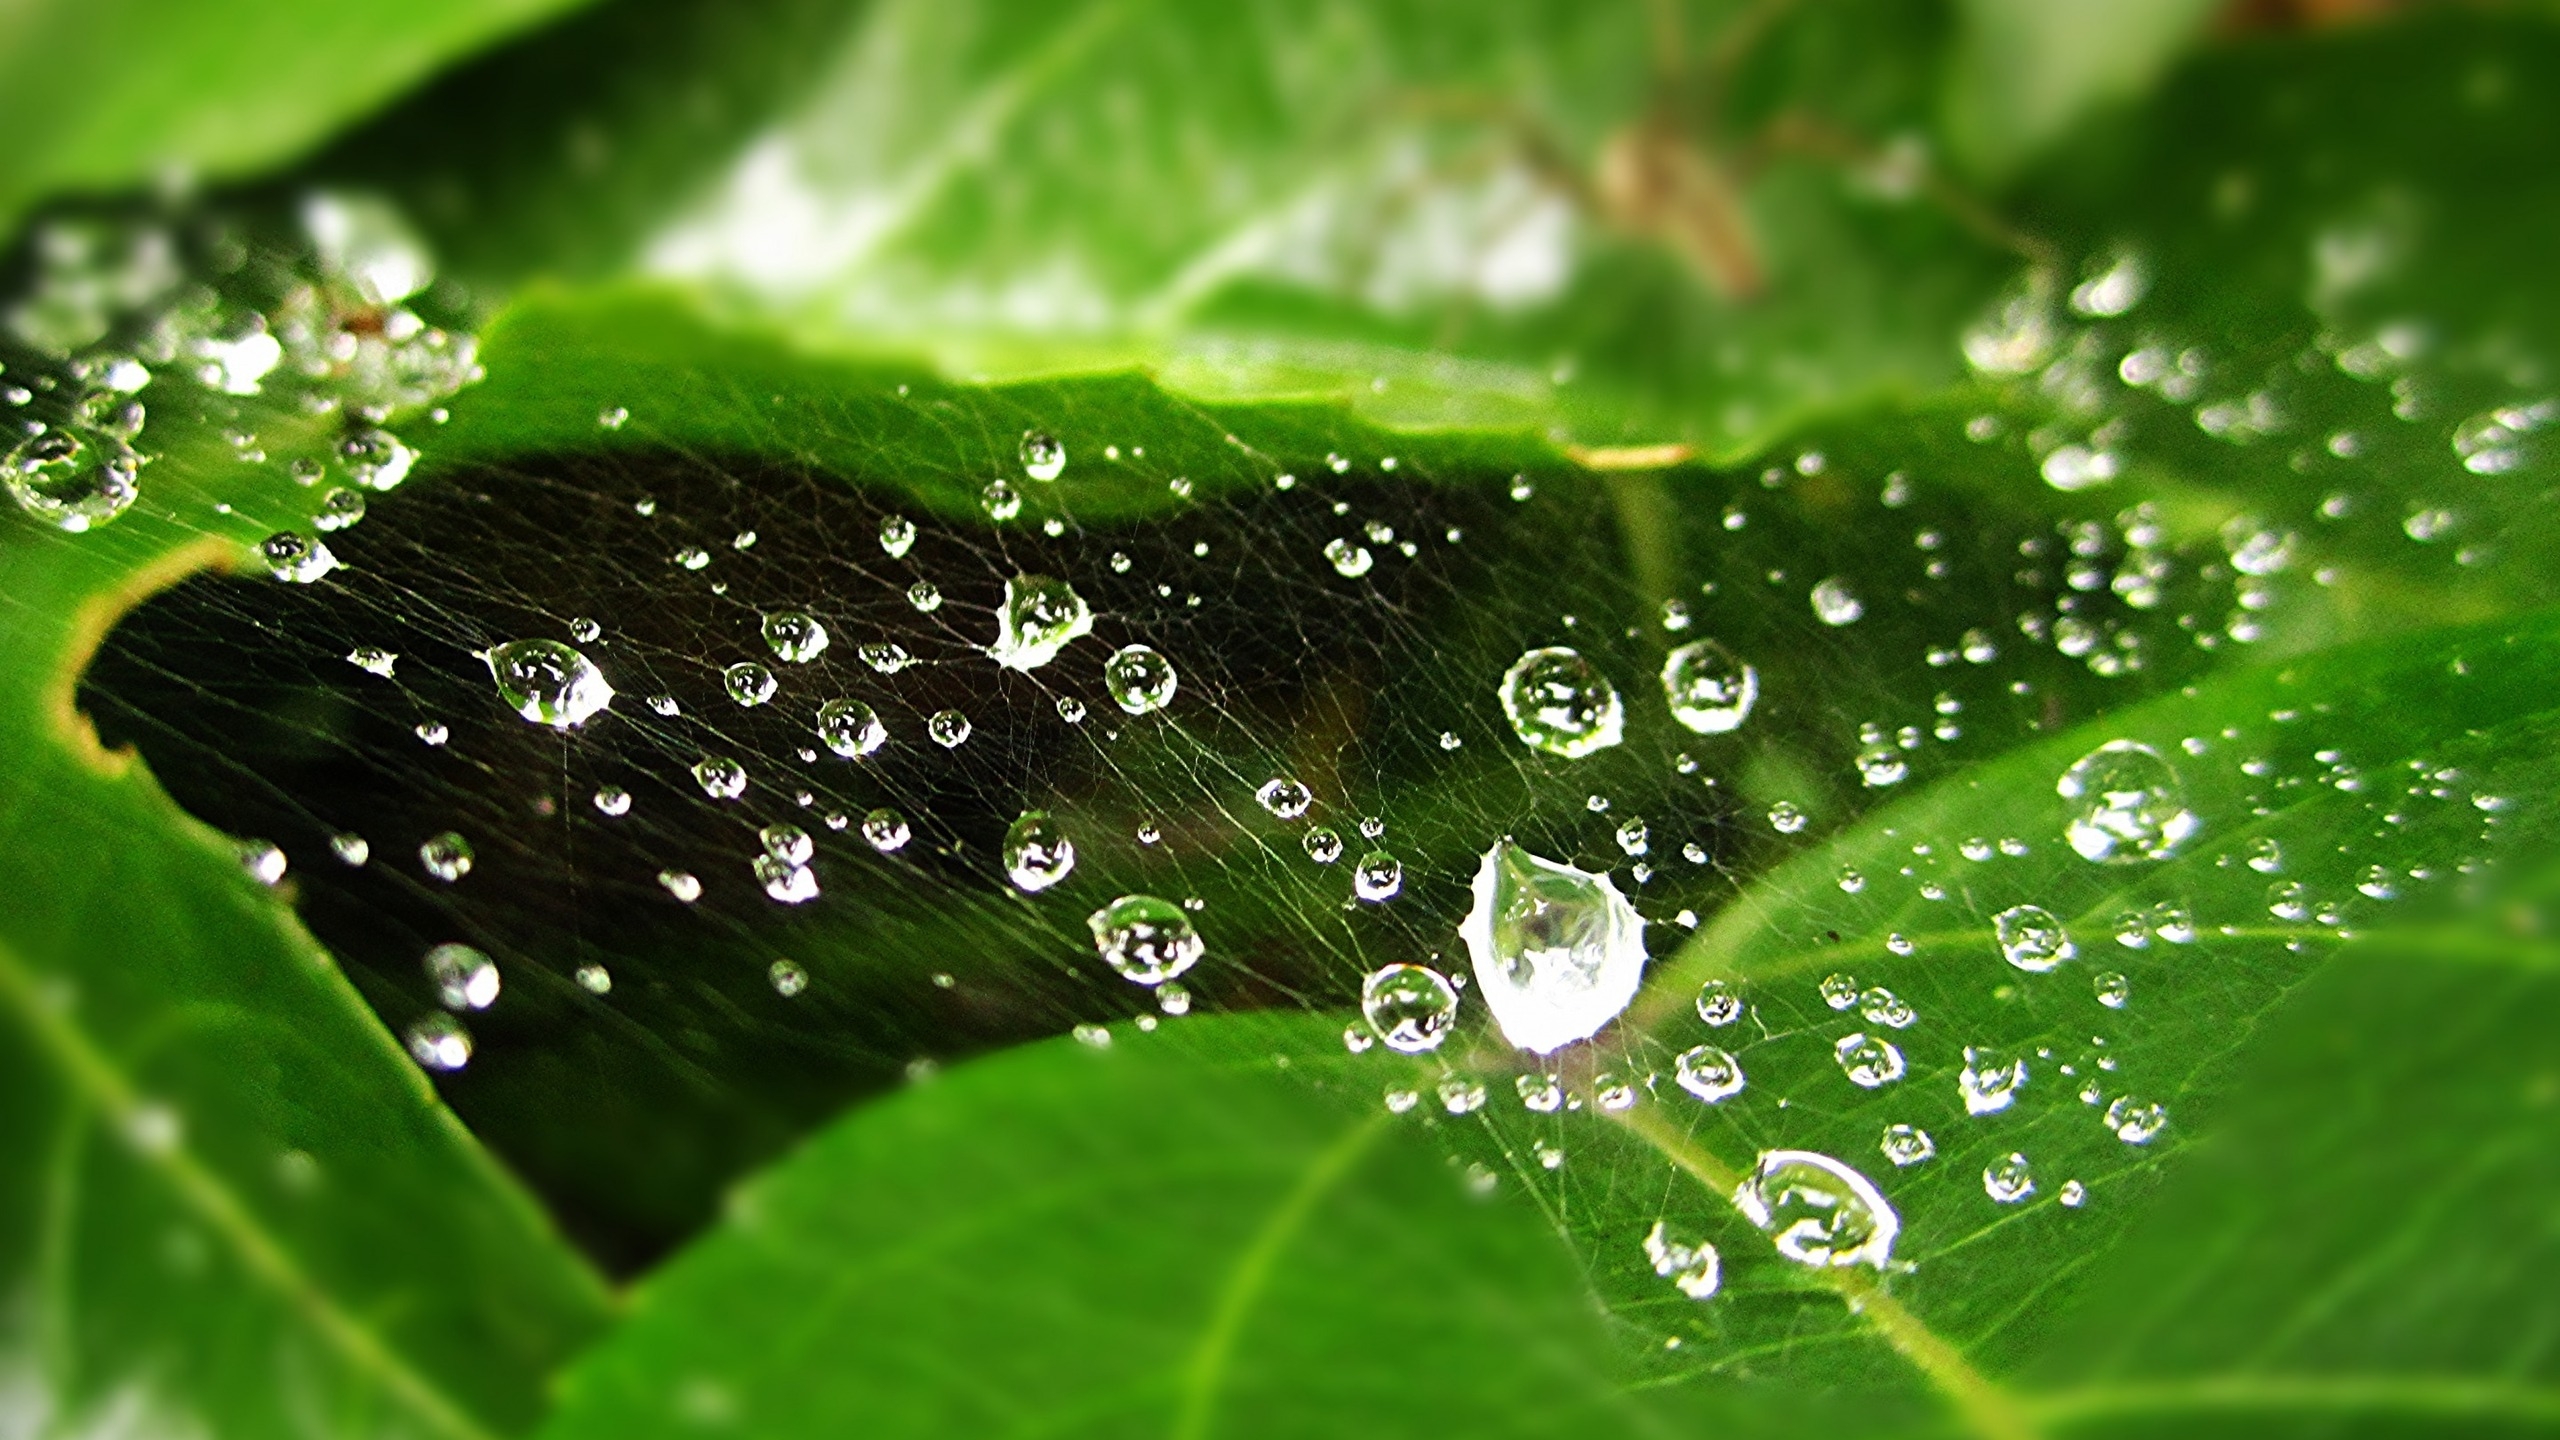 Water Drops on Spider Web  for 2560x1440 HDTV resolution